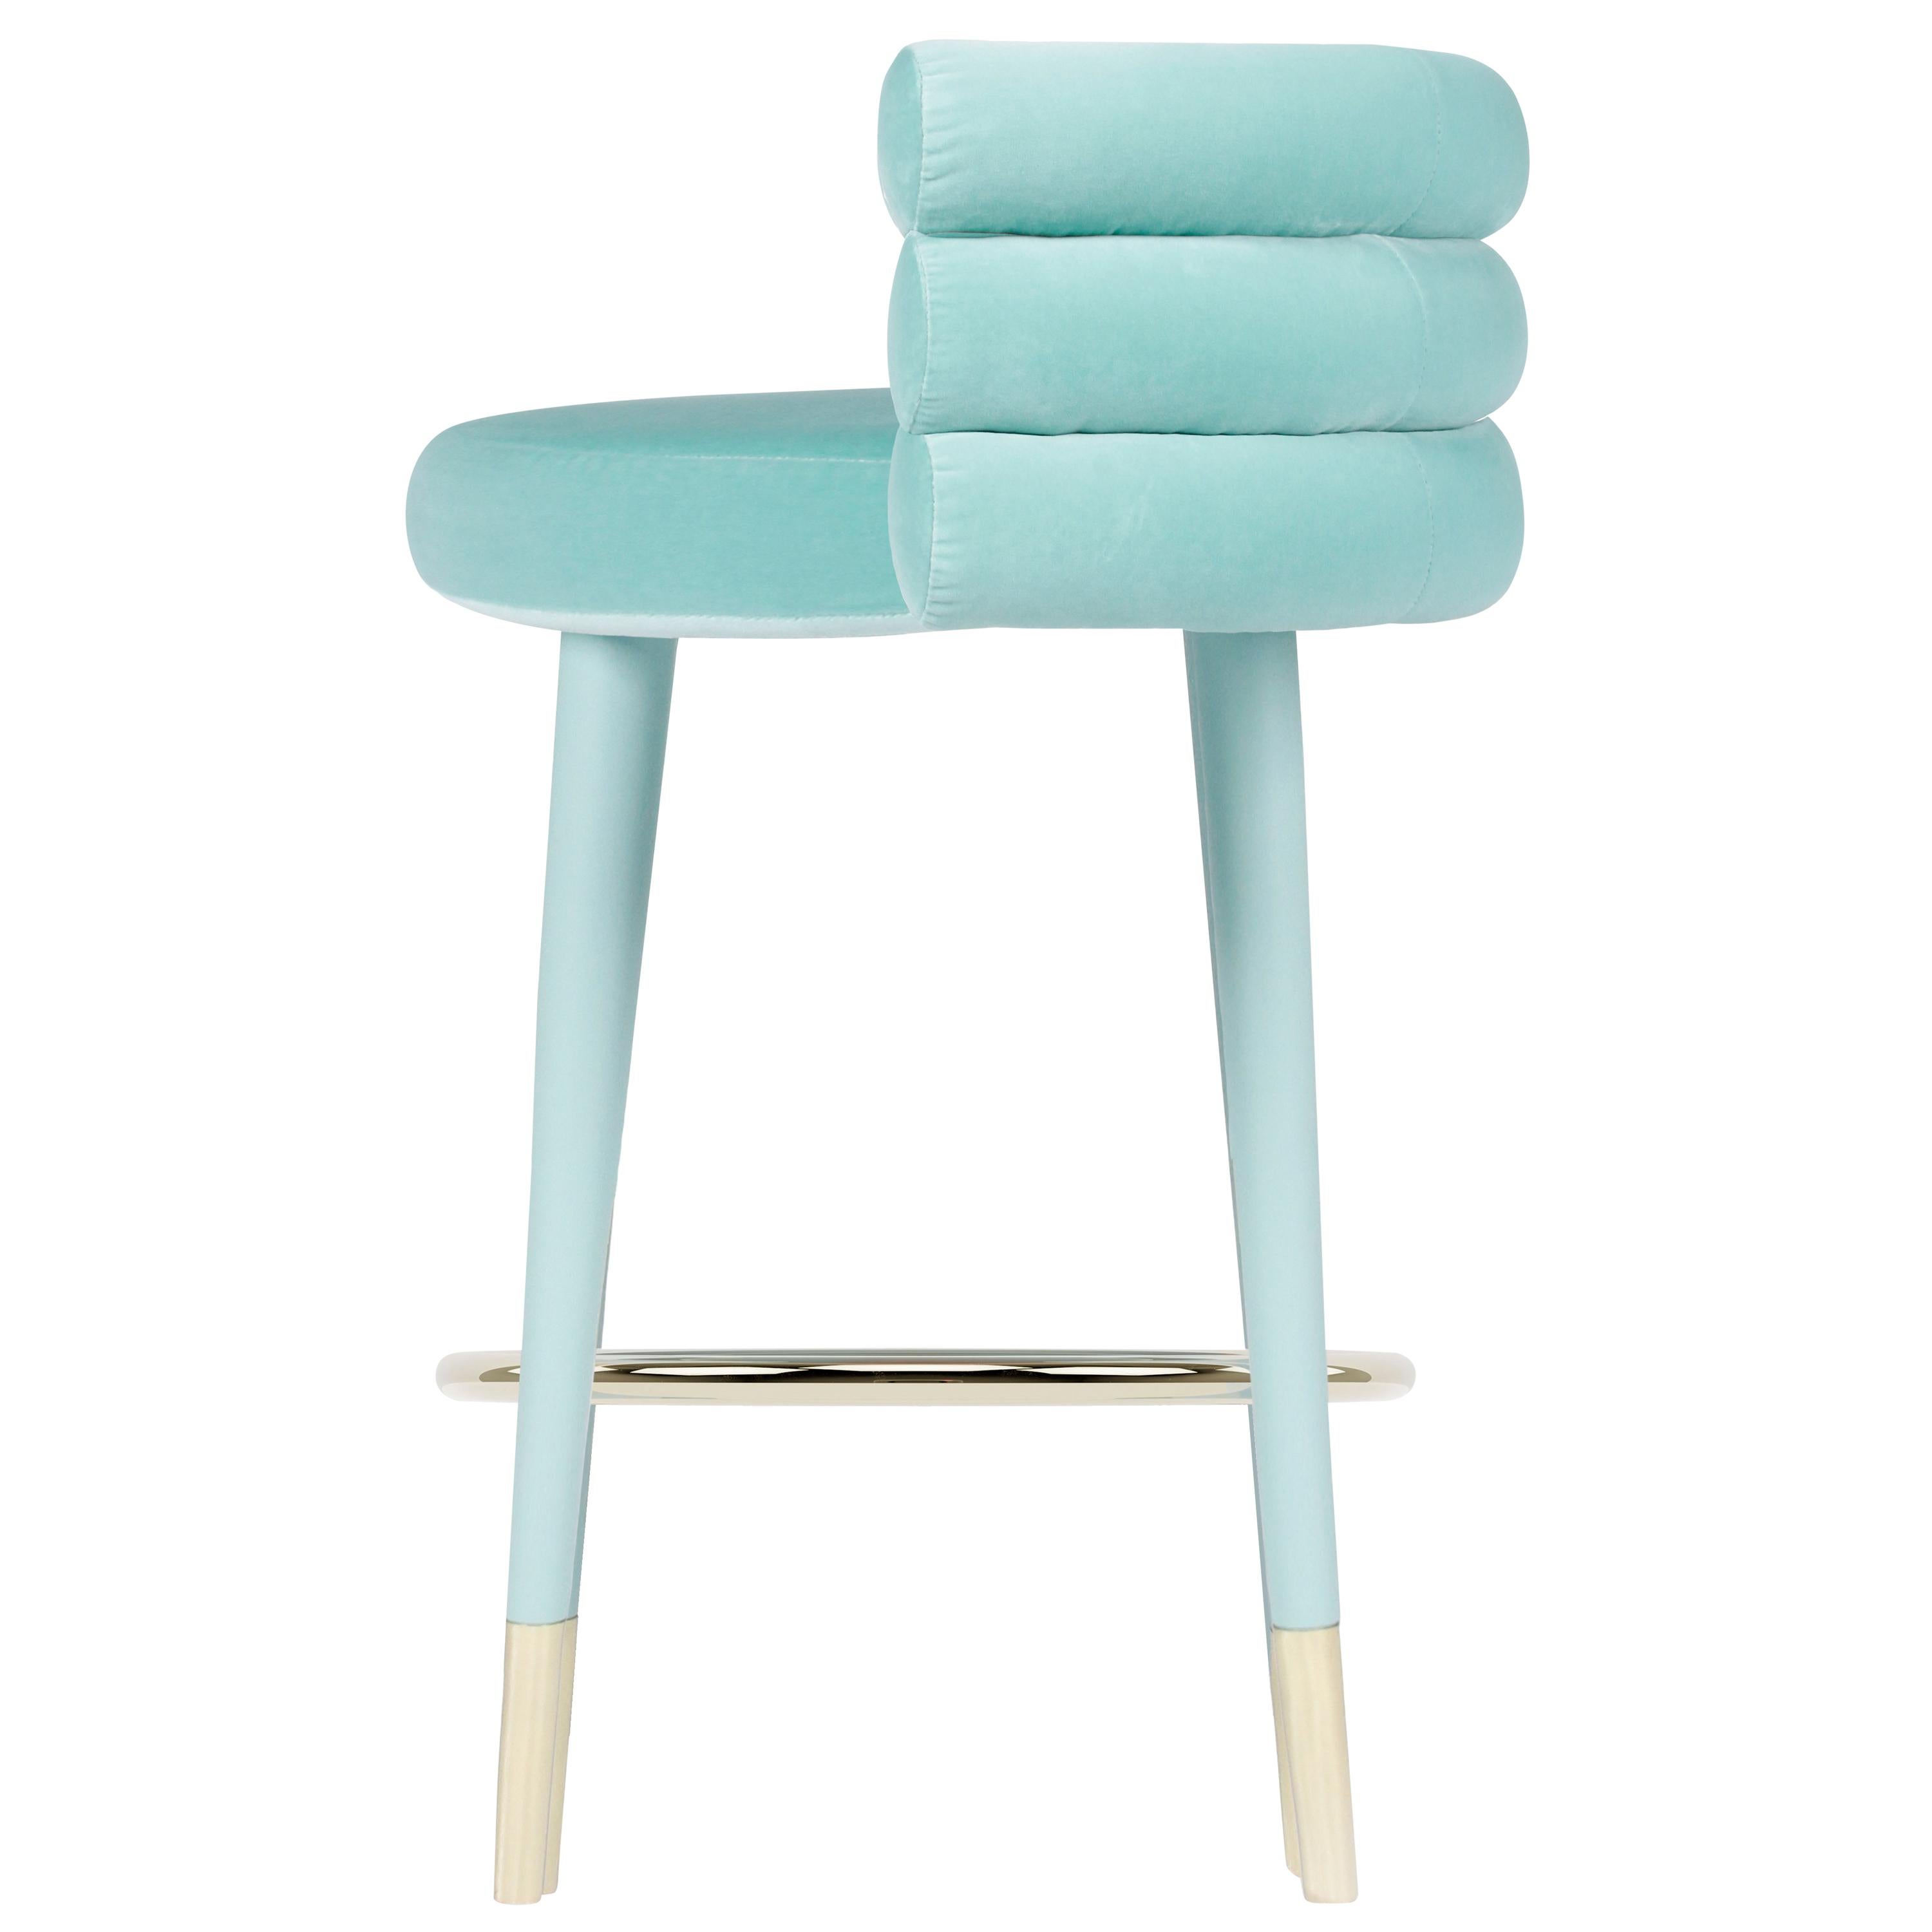 Marshmallow bar stool, Royal stranger
Dimensions: 100 x 70 x 60 cm
Materials: Velvet upholstery, brass
Available in: Mint green, light pink, Royal green, Royal red

Royal stranger is an exclusive furniture brand determined to bring you the best